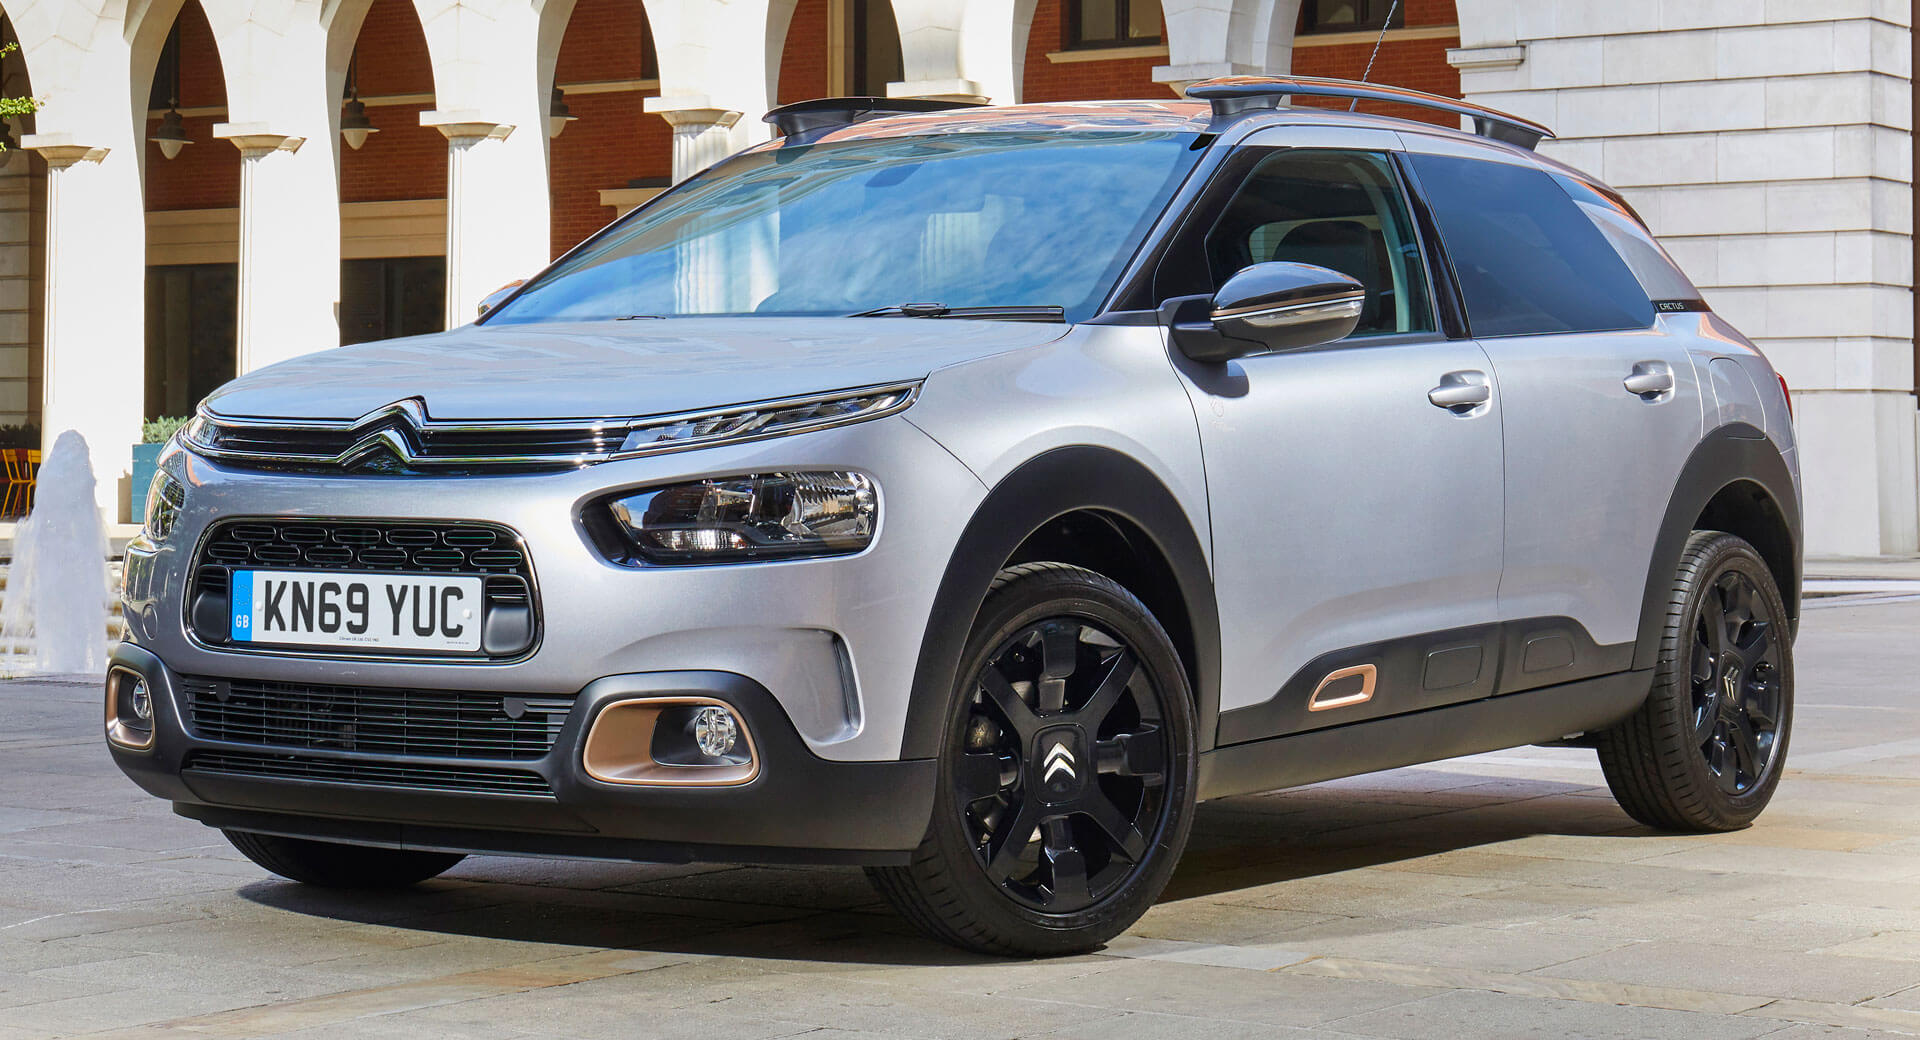 Citroen C4 Cactus Successor Confirmed For 2020 With Battery-Electric Option